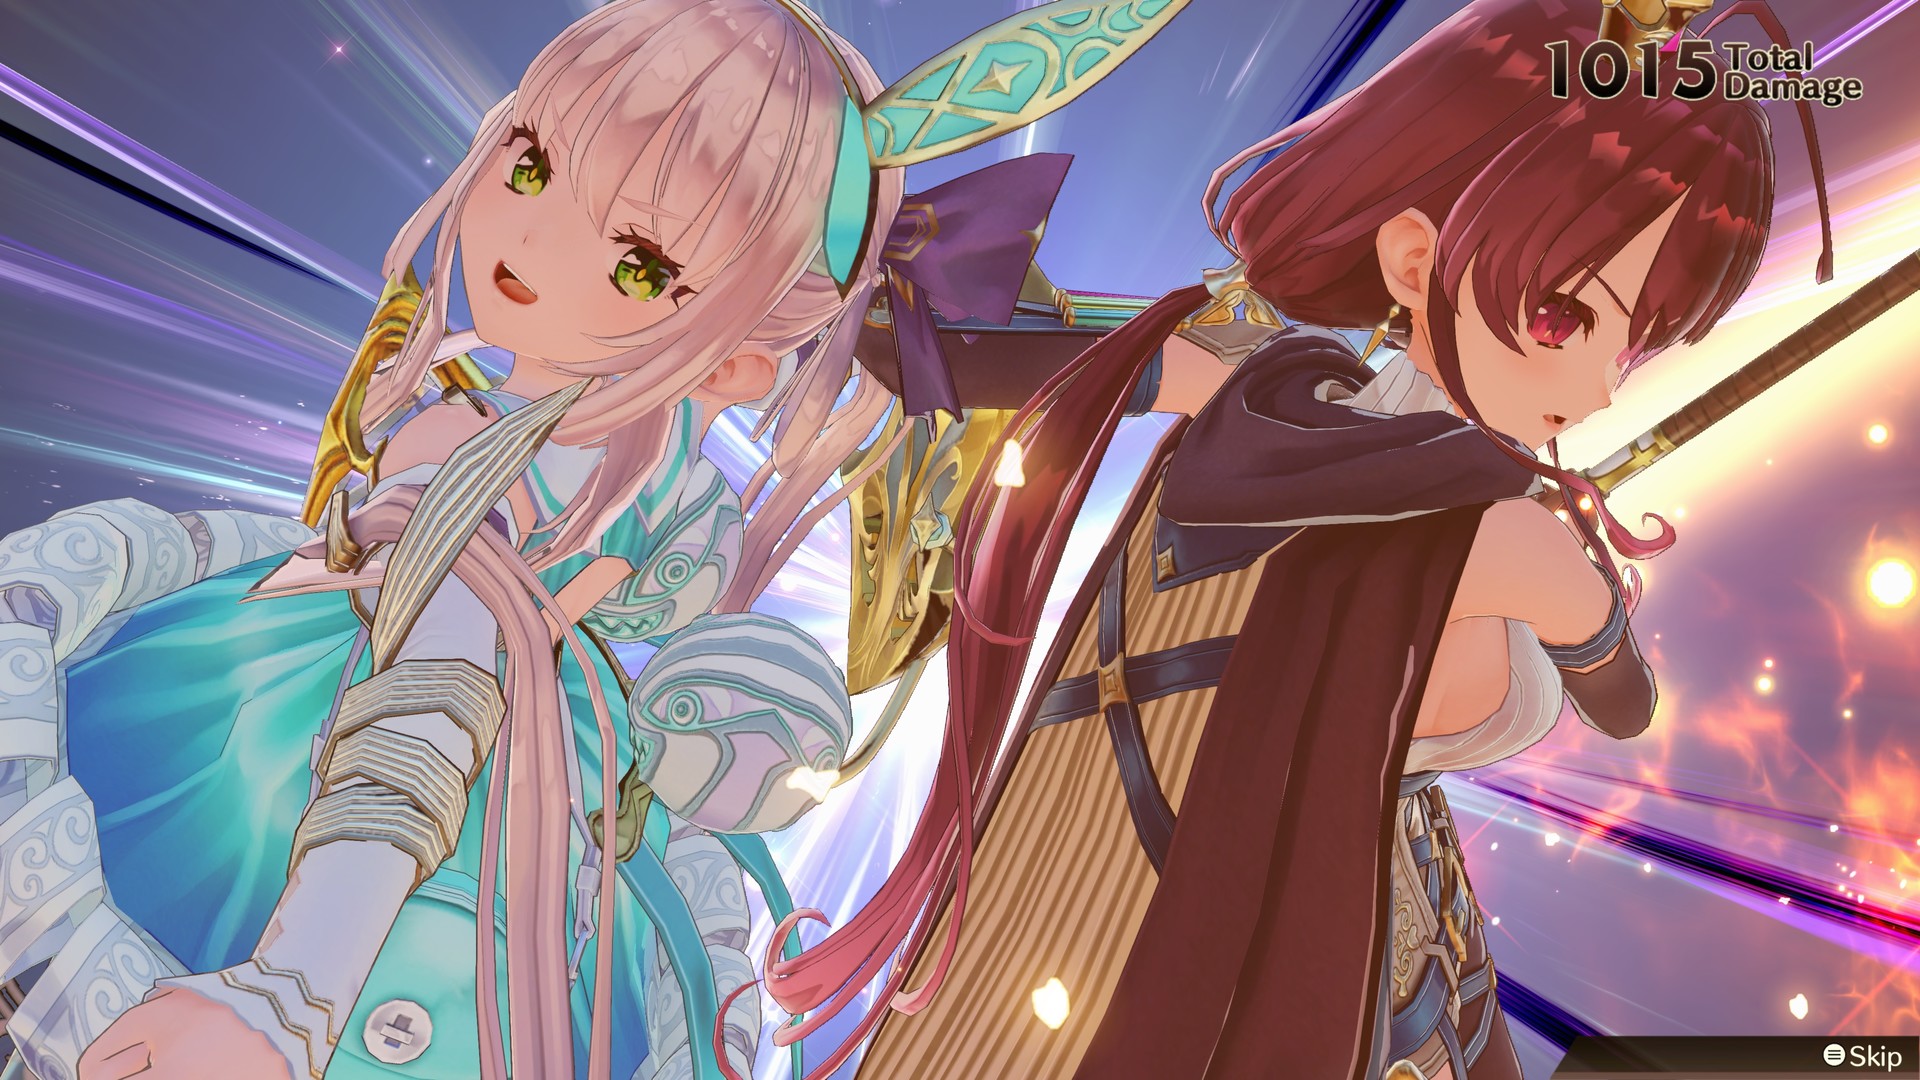 Atelier Sophie 2: The Alchemist Of The Mysterious Dream Deluxe Edition Steam CD Key